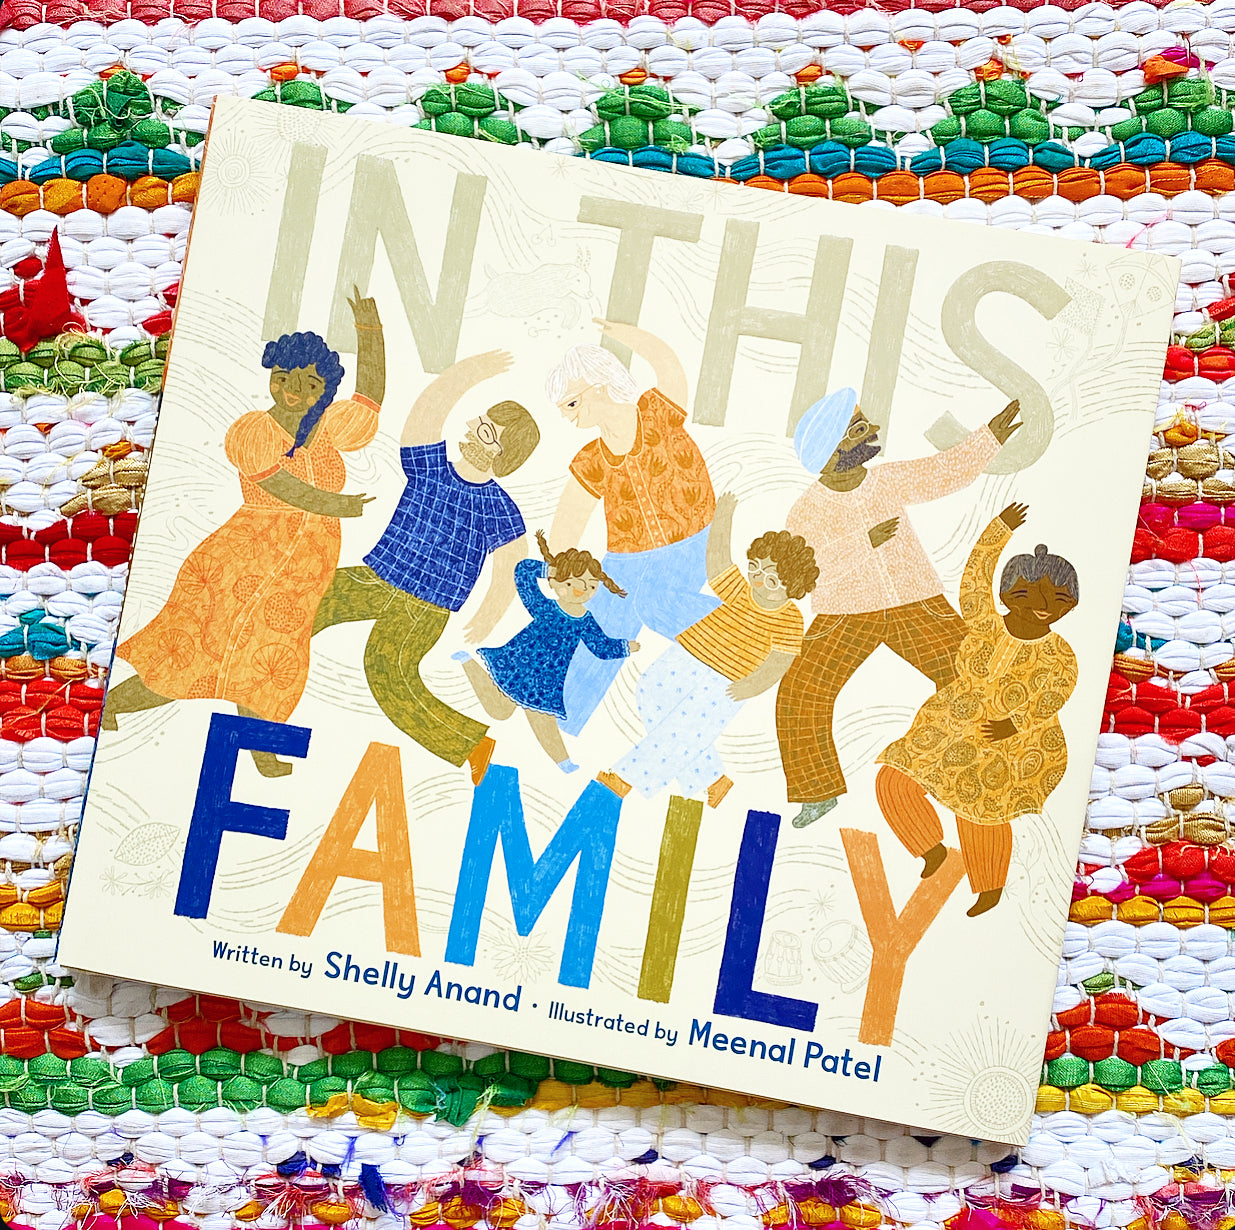 In This Family | Shelly Anand (Author) + Meenal Patel (Illustrator)